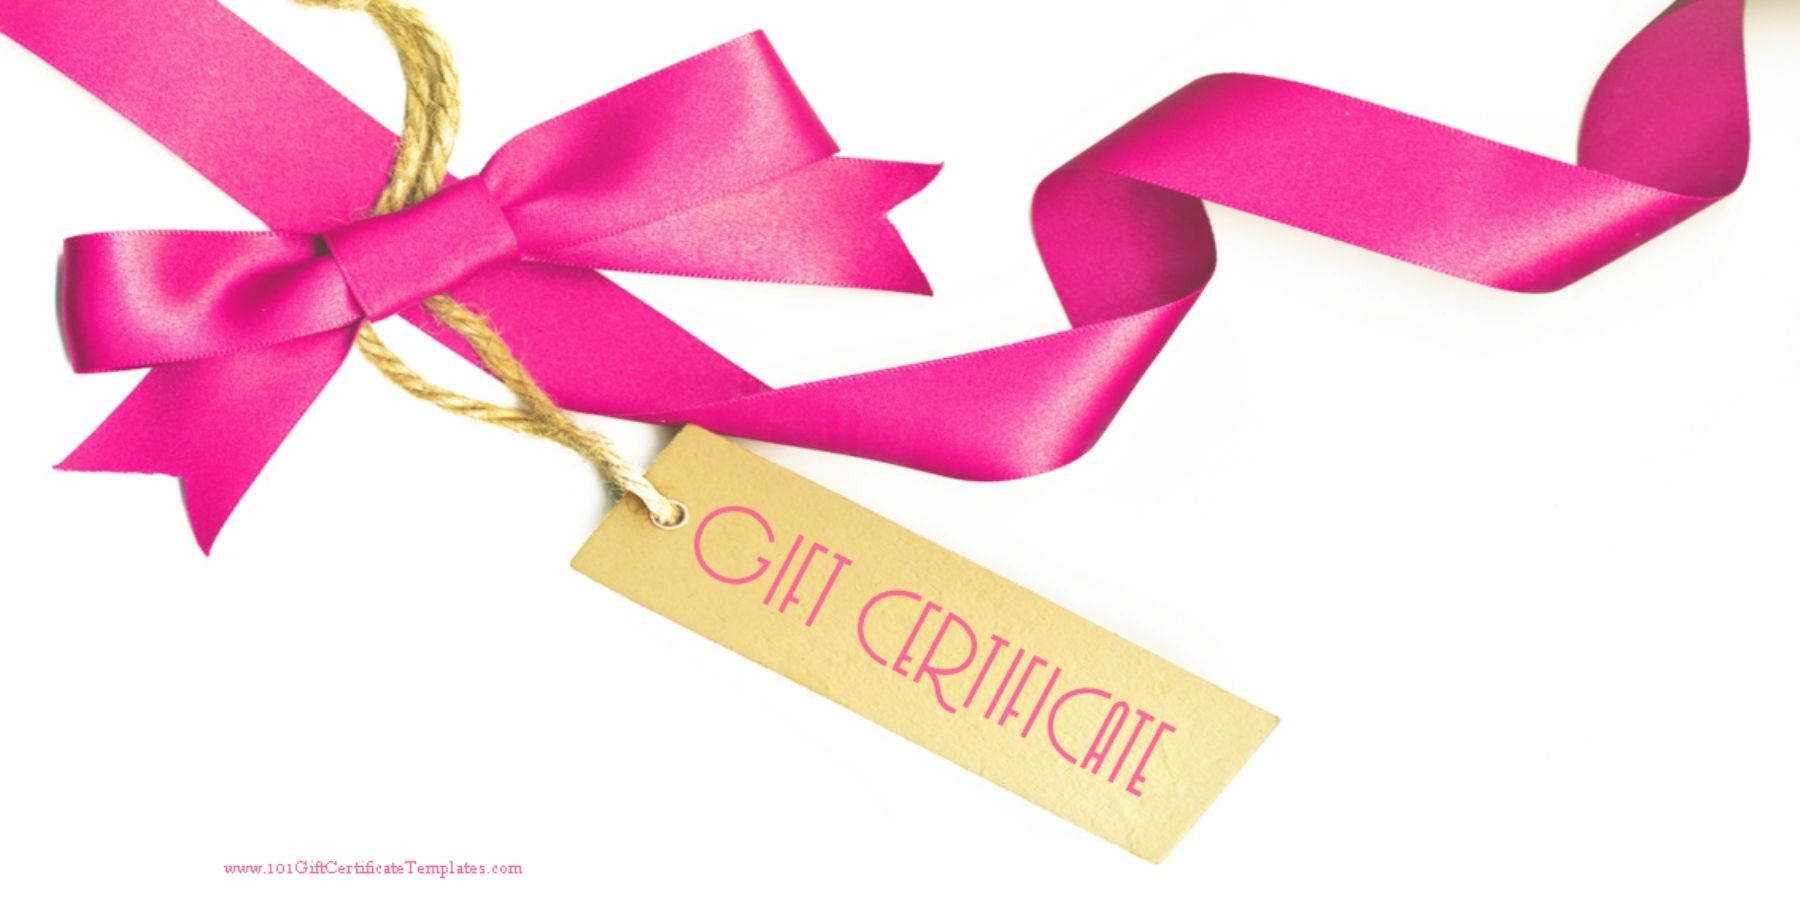 Gift Certificate With A White Background And A Pink Ribbon Intended For Pink Gift Certificate Template